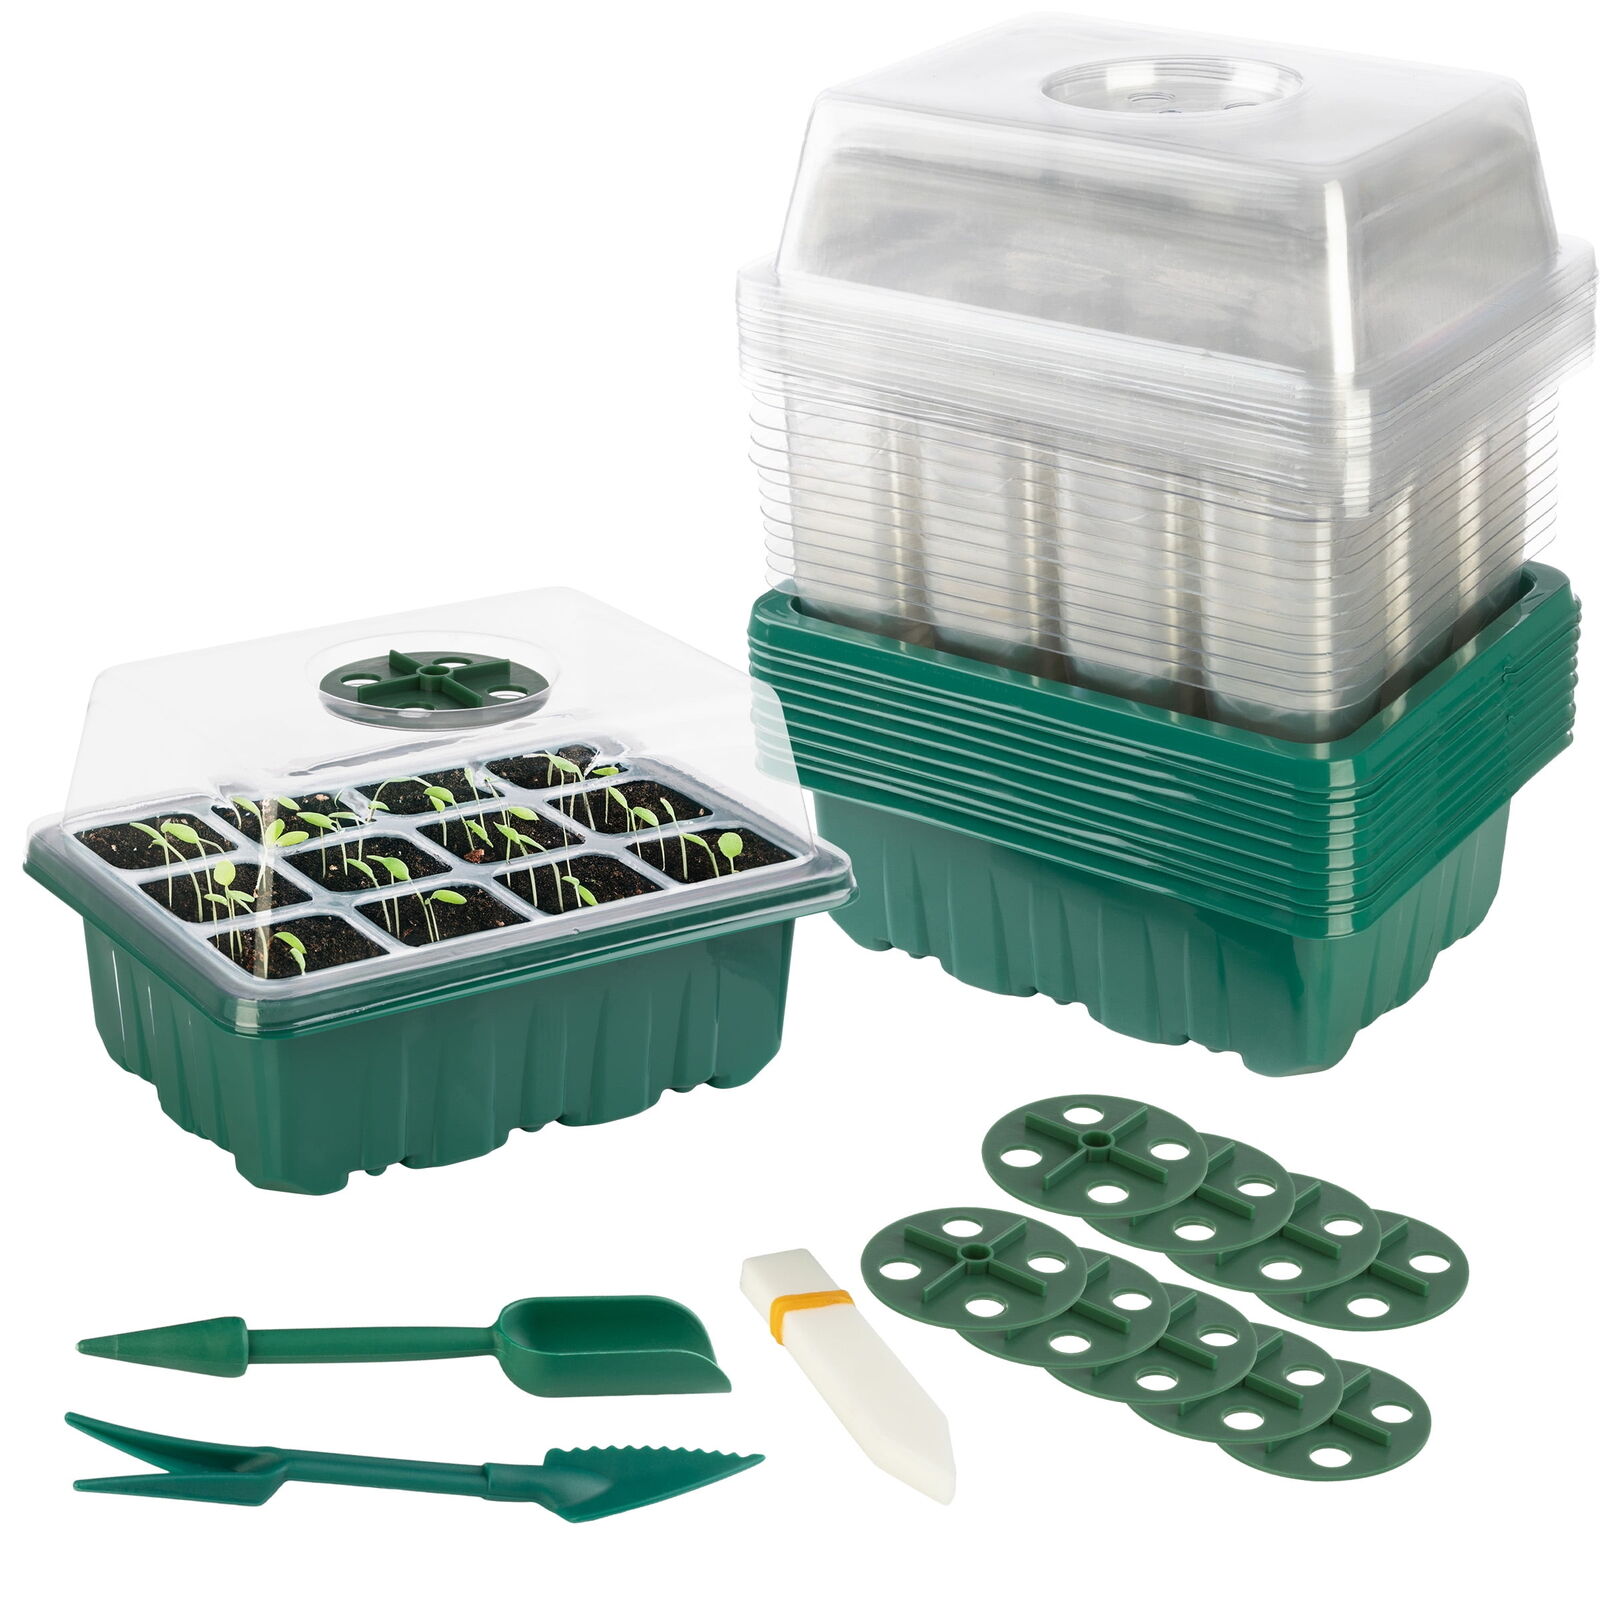 Home-Complete Seed Starter Tray 10-Pack - Plant Trays with Humidity Domes